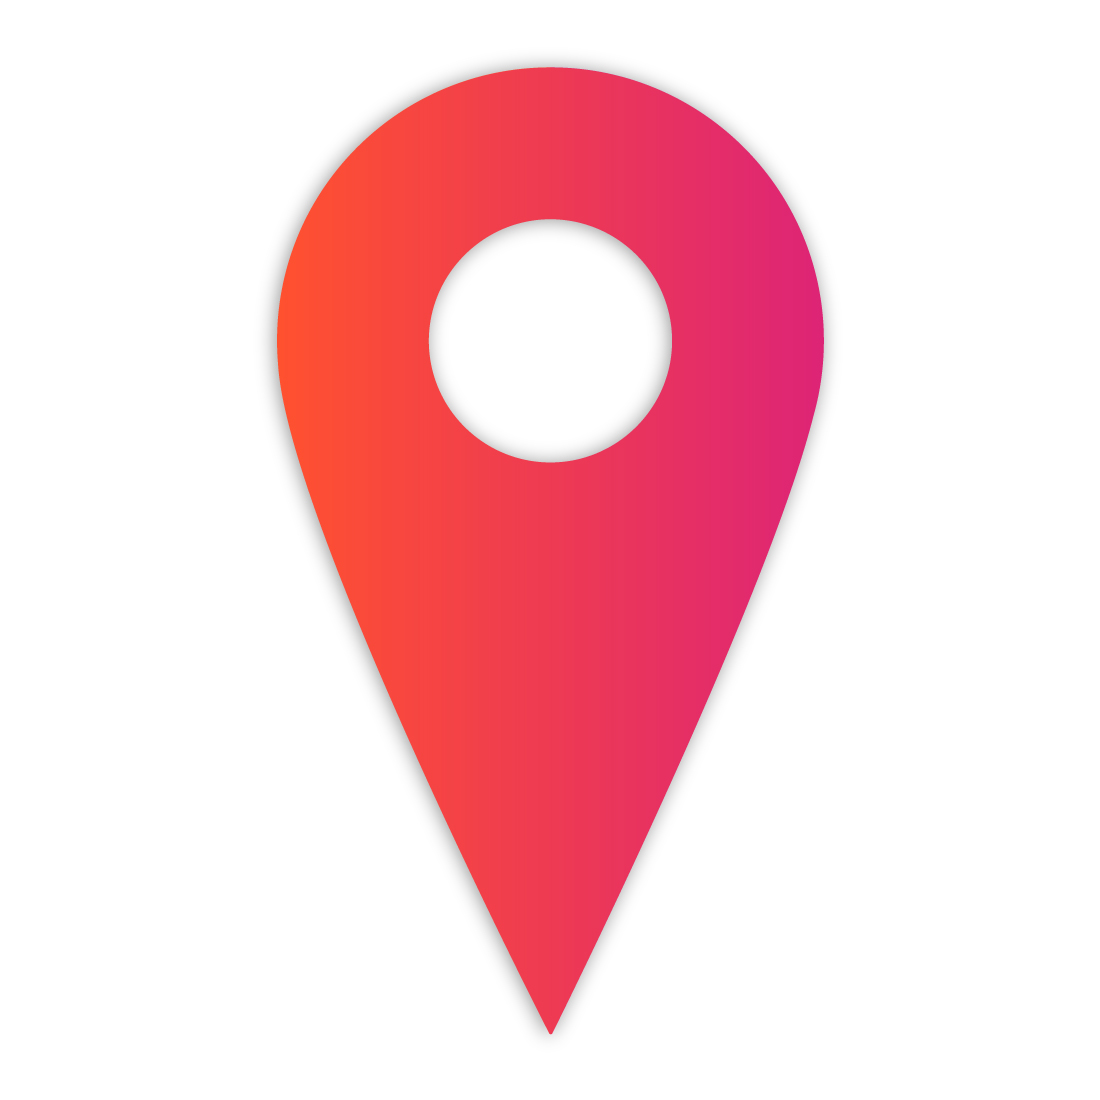 location icon gradient filled 983